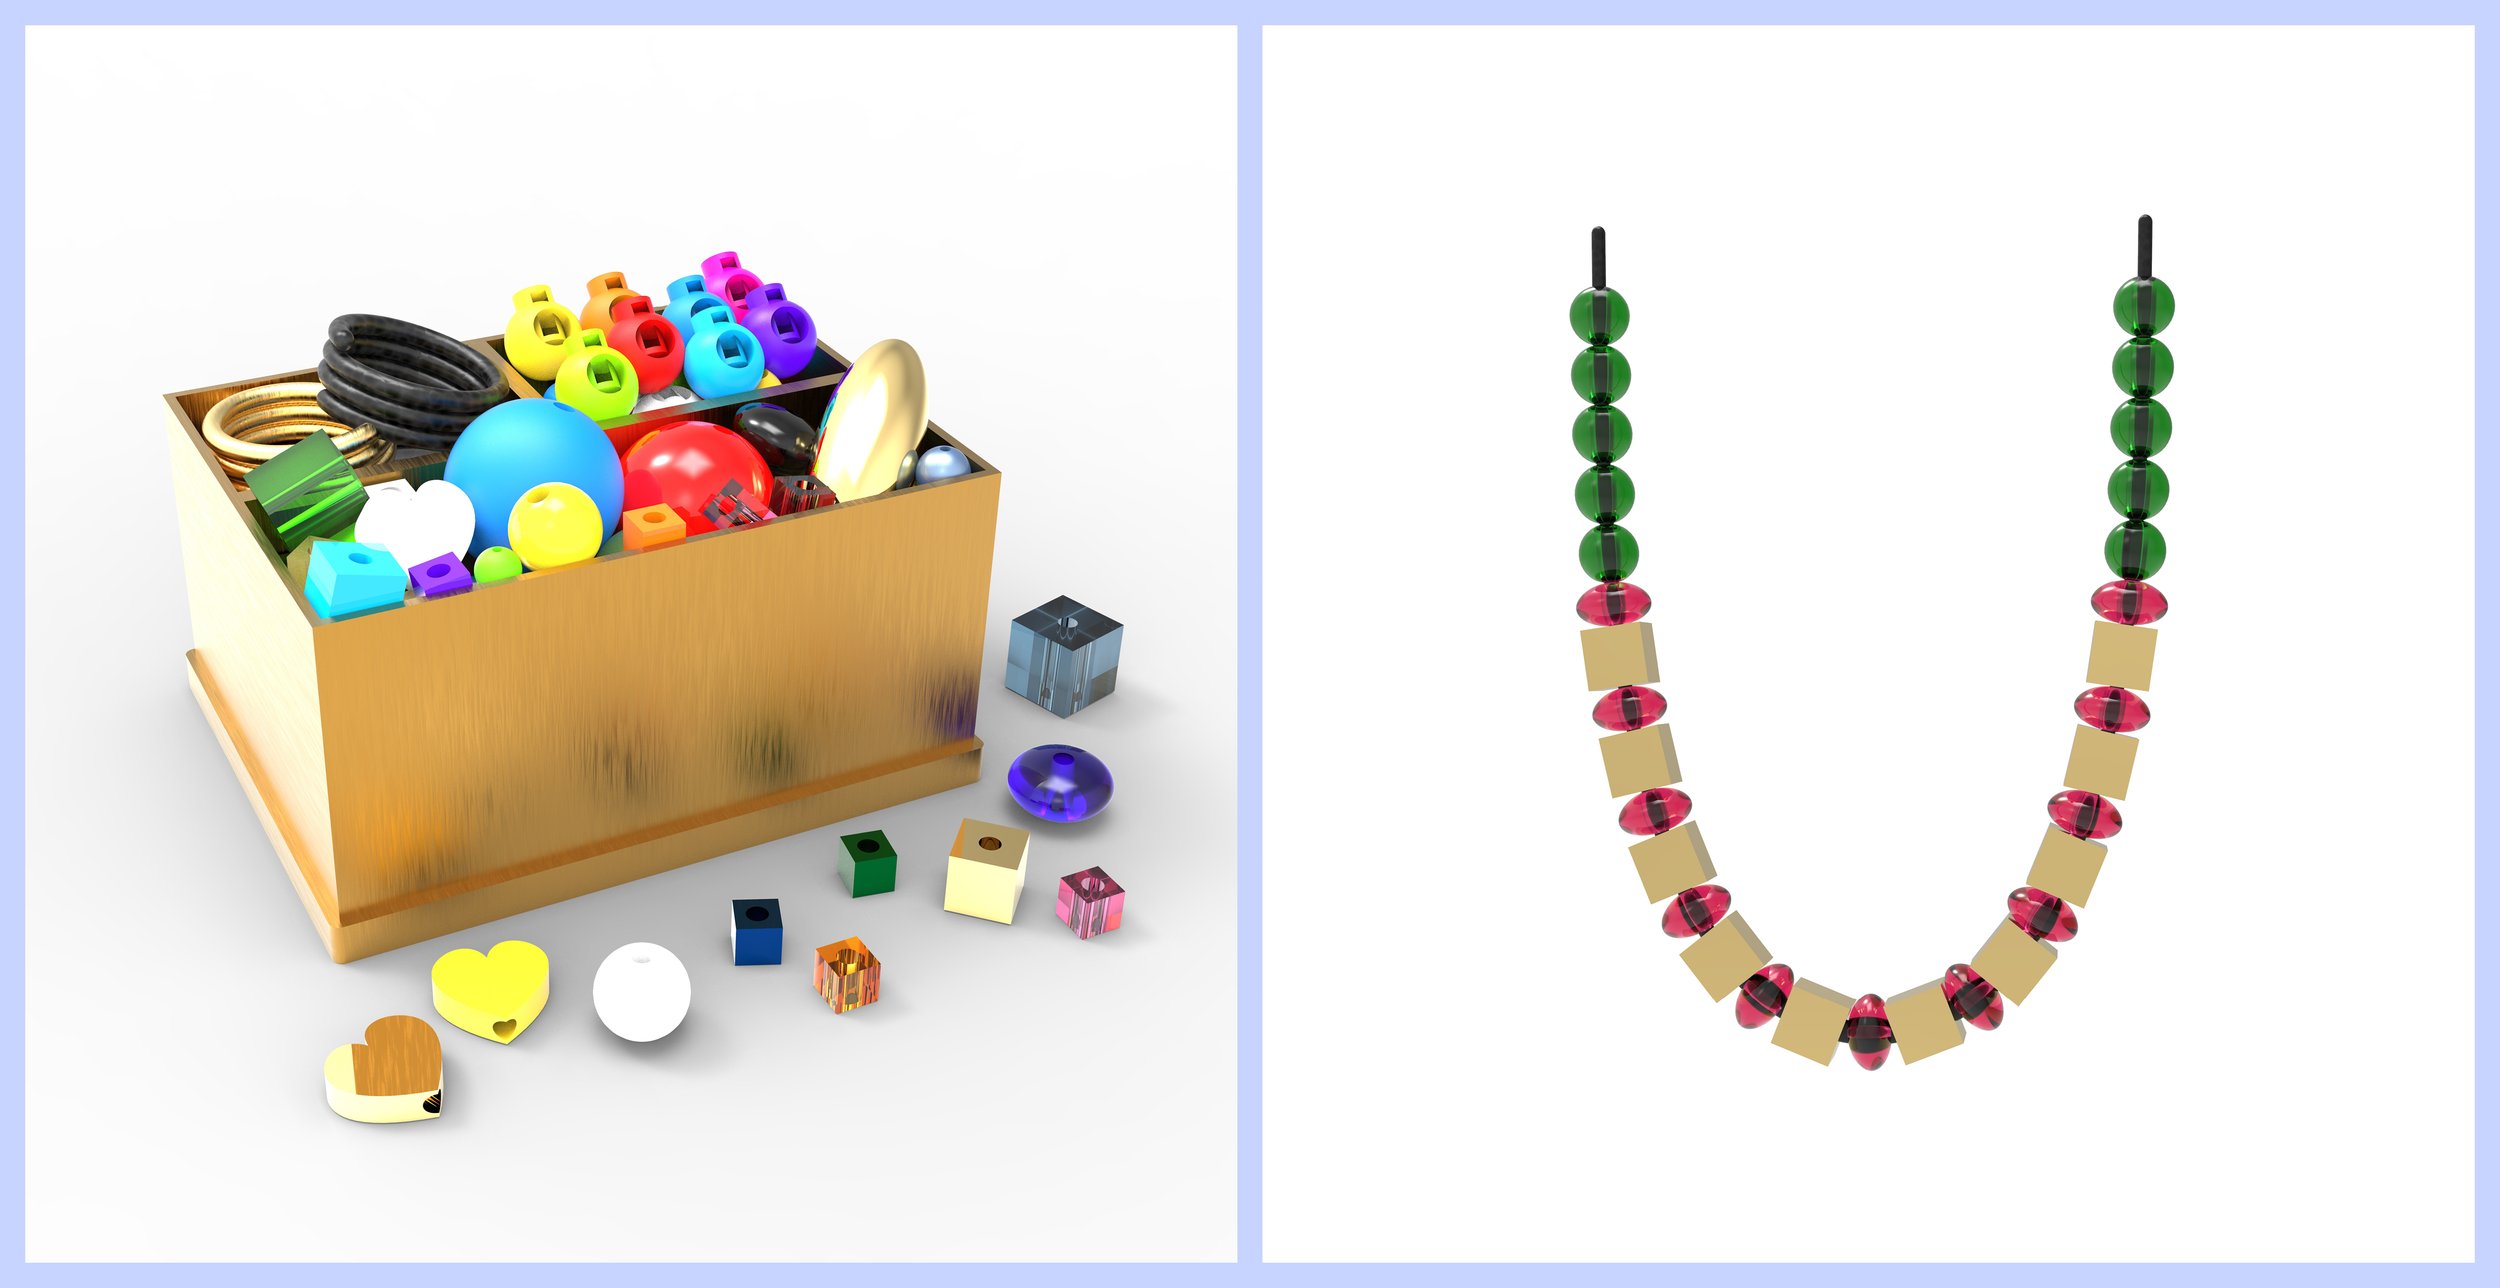 3D Renderings of the Mask Bedazzling Kit and Box